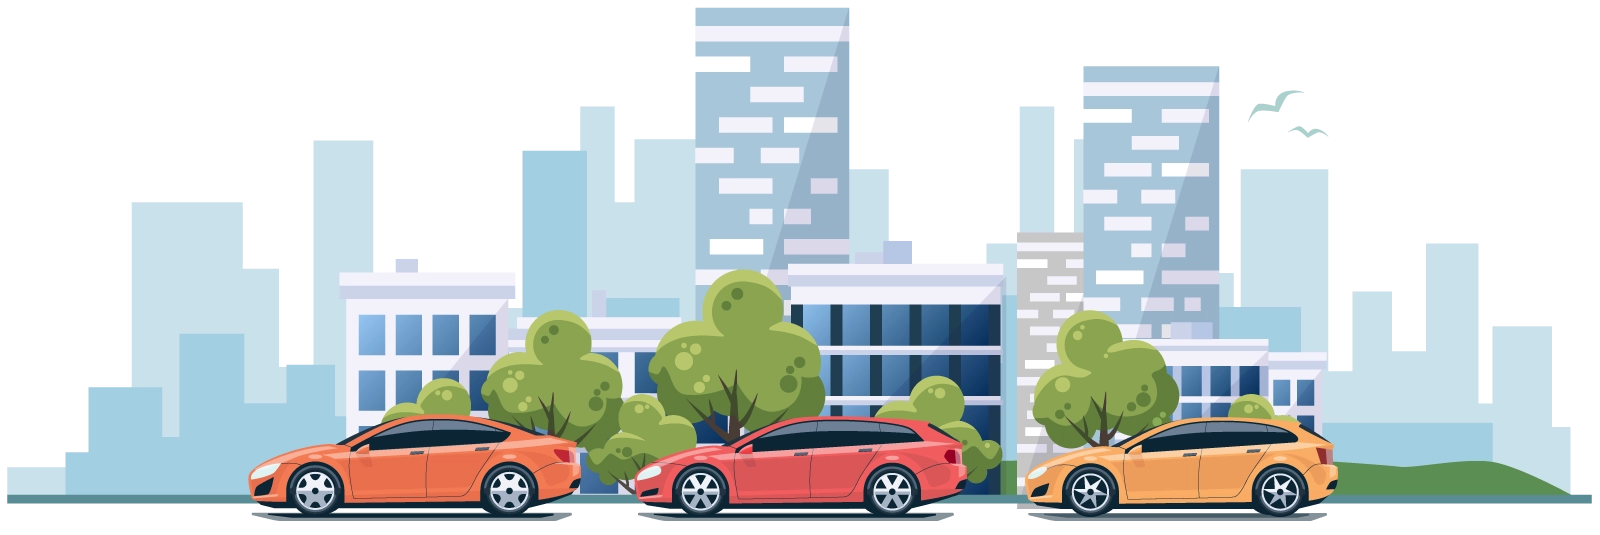 cars with city background